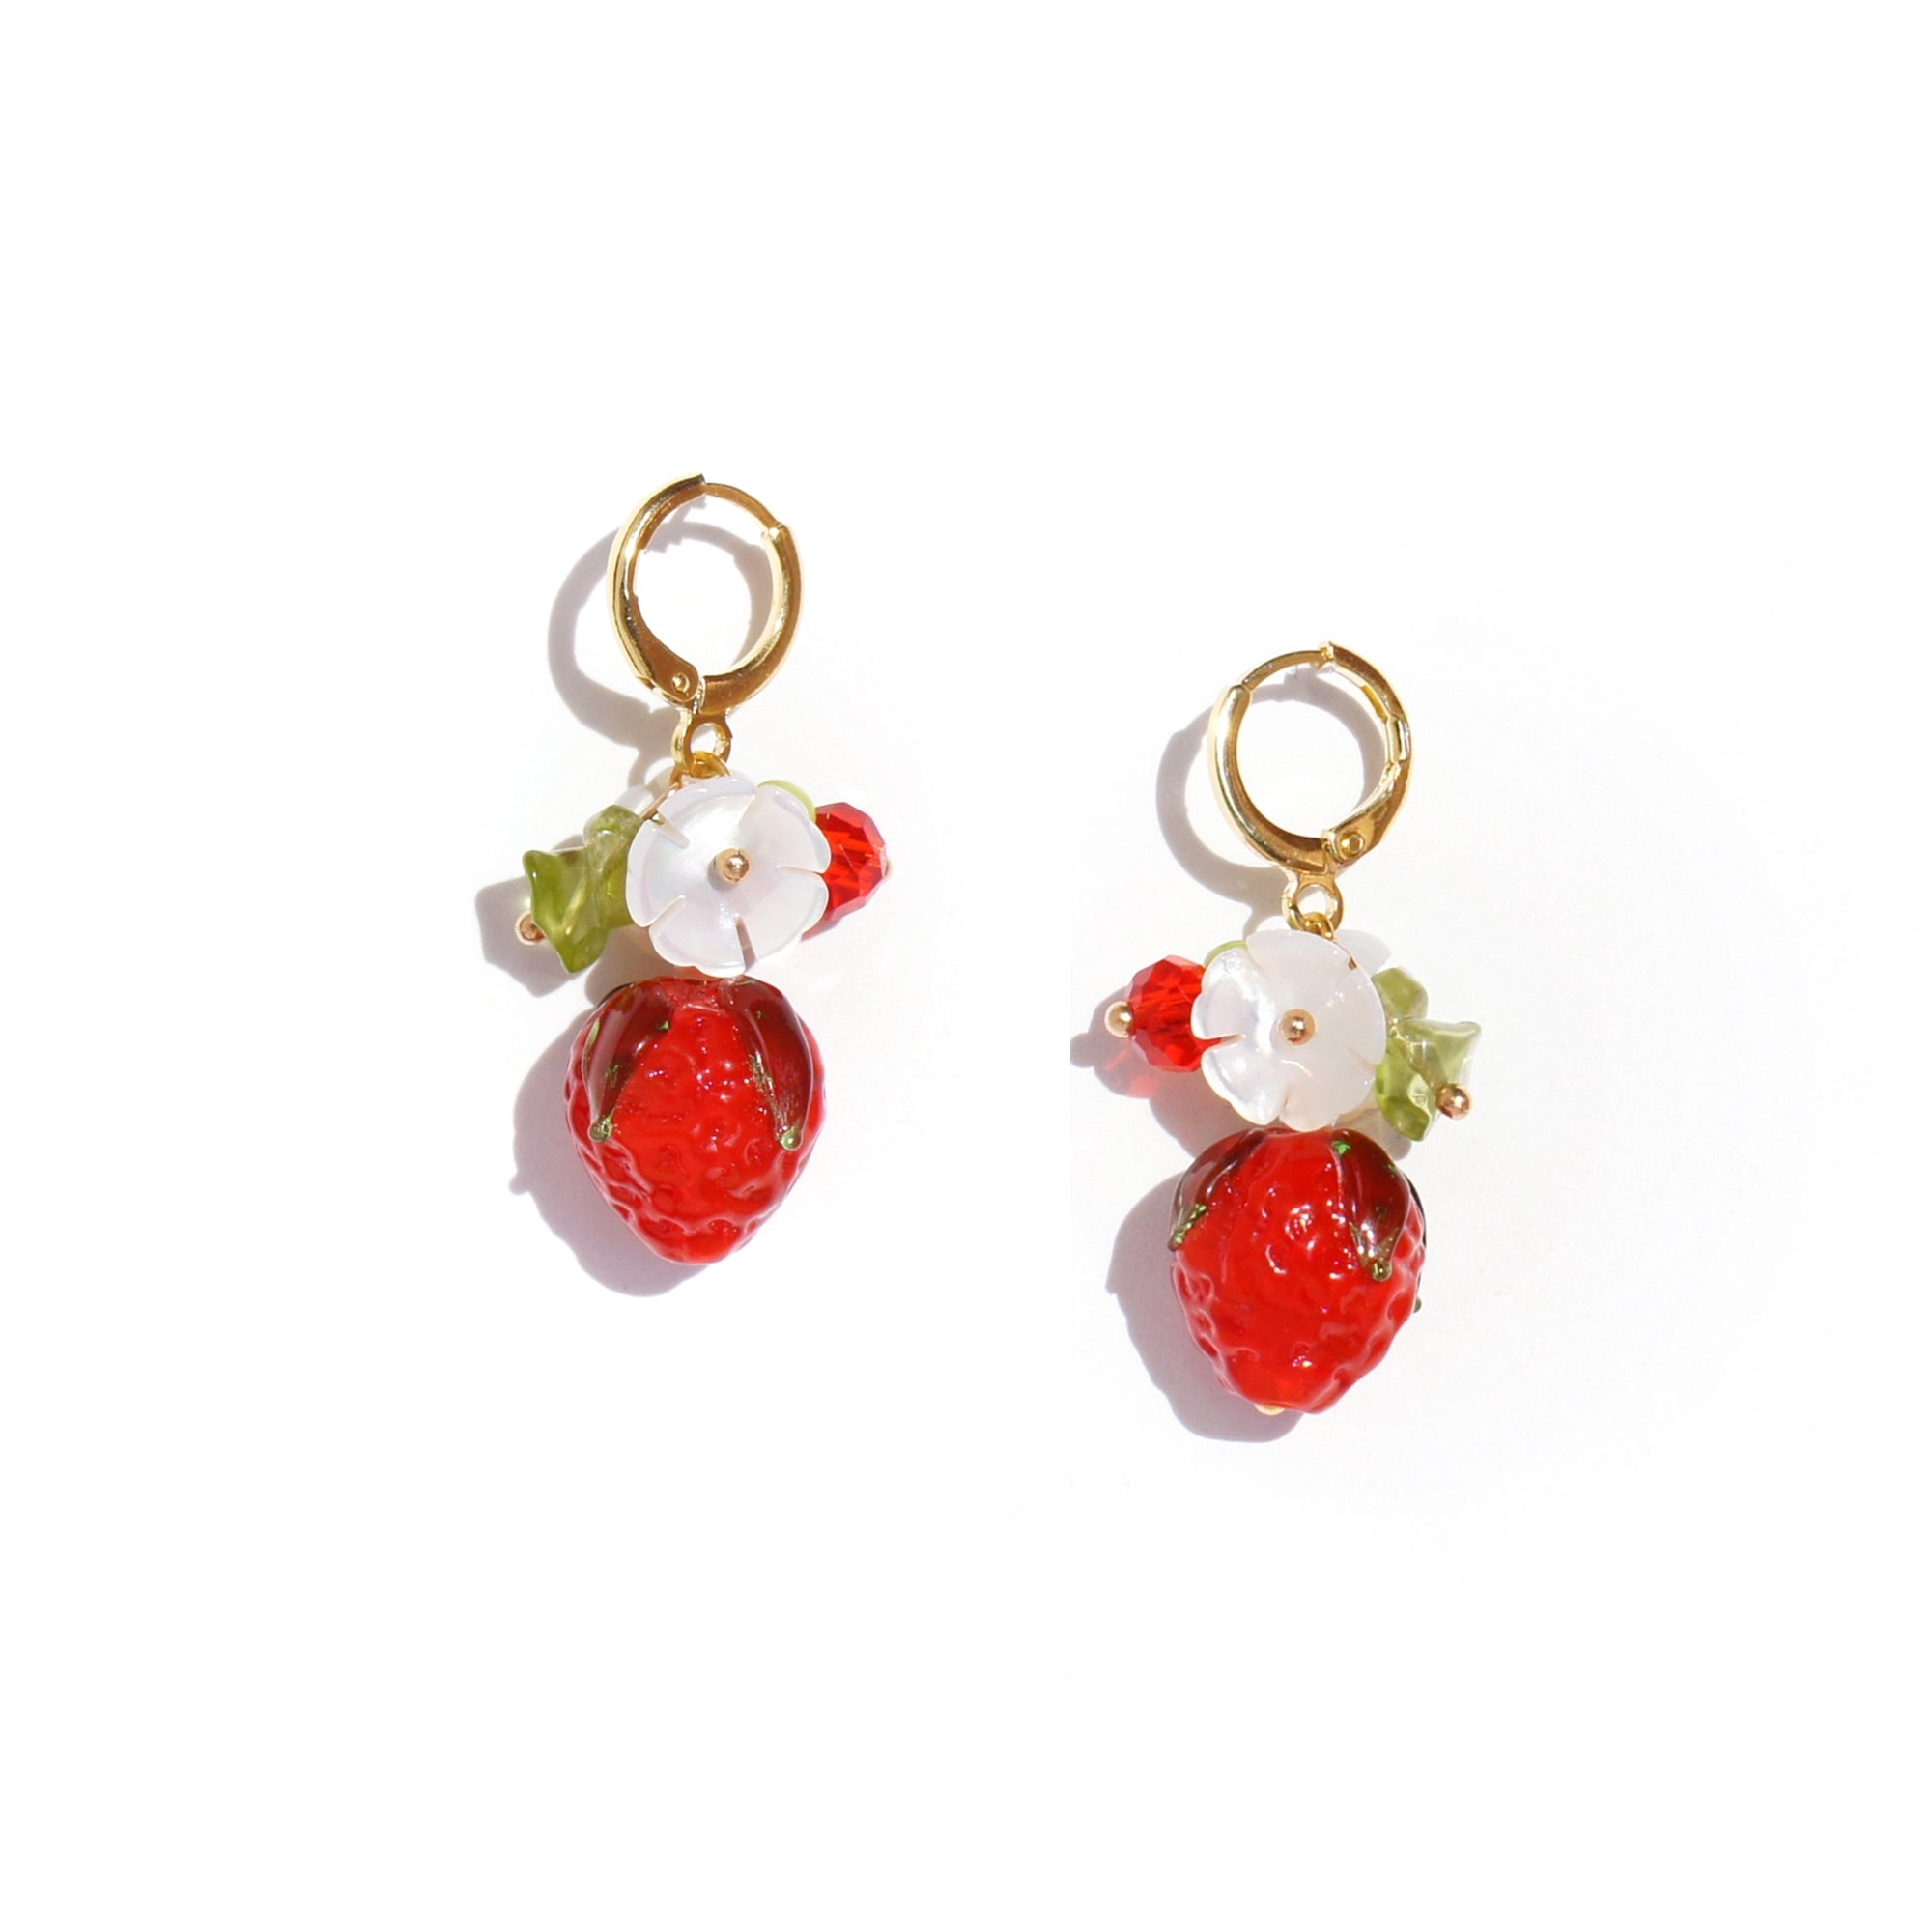 Strawberry and Mother of Pearl Flower Drop Earrings